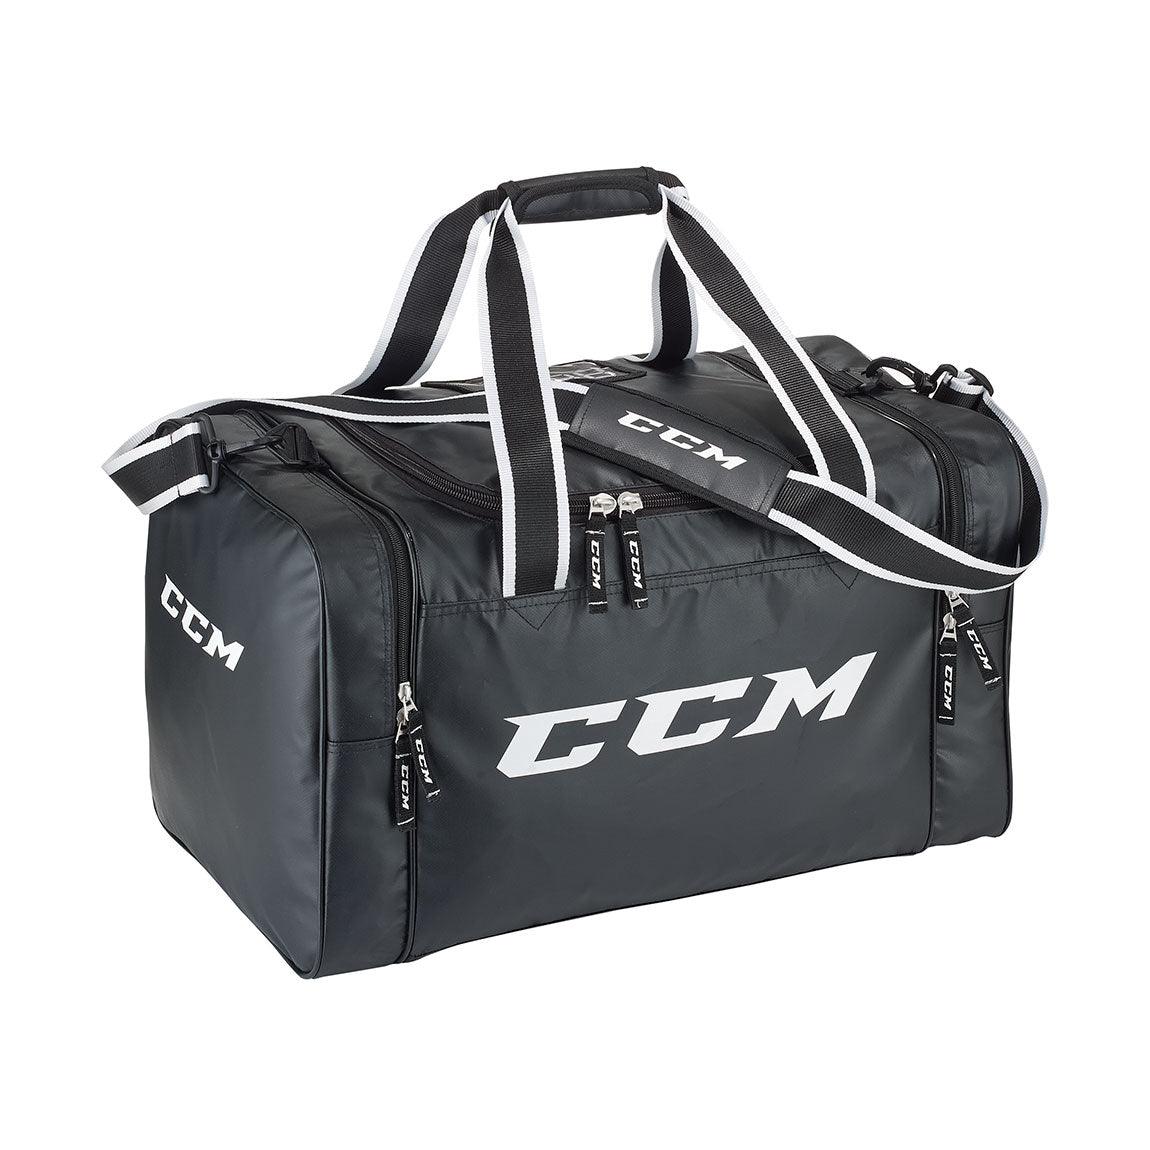 Team Sport Bag - Sports Excellence